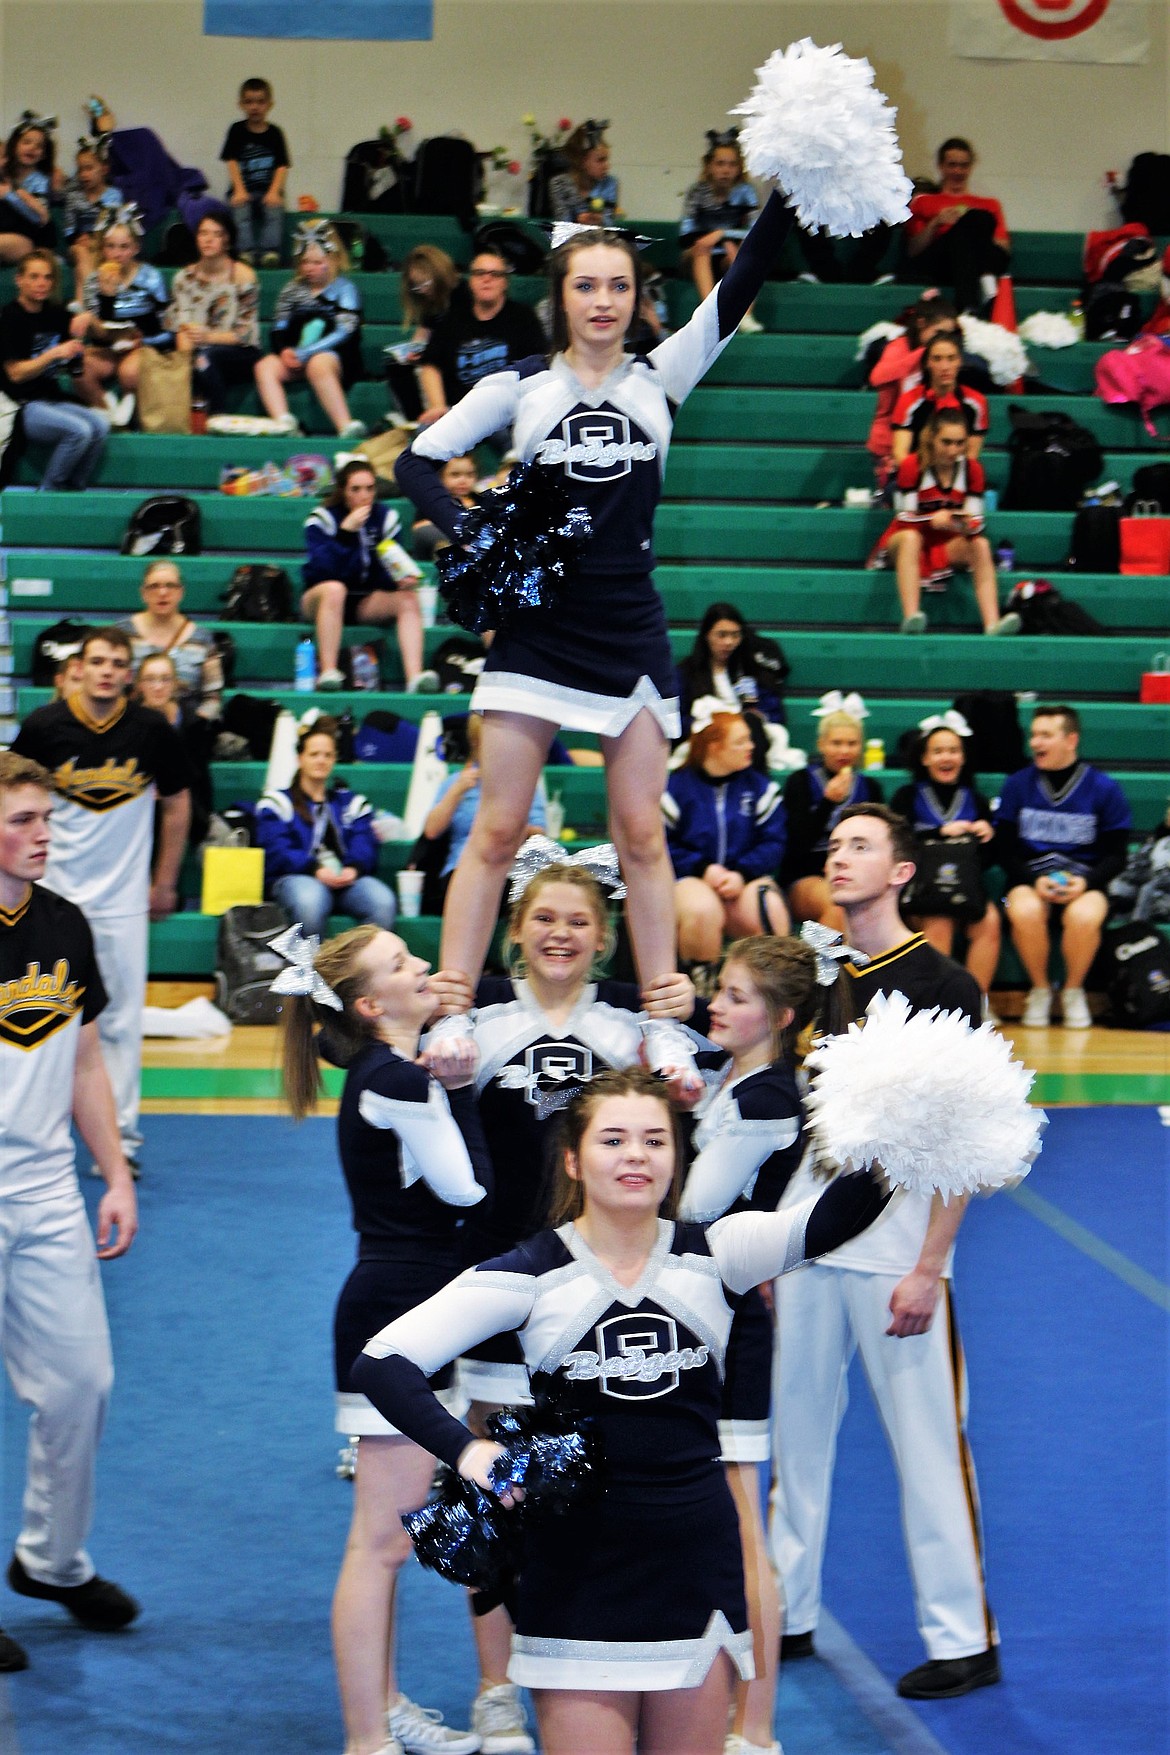 Kylie Underhill is boosted by her teammates as the Badger cheerleaders compete at the Prairie Classic event.